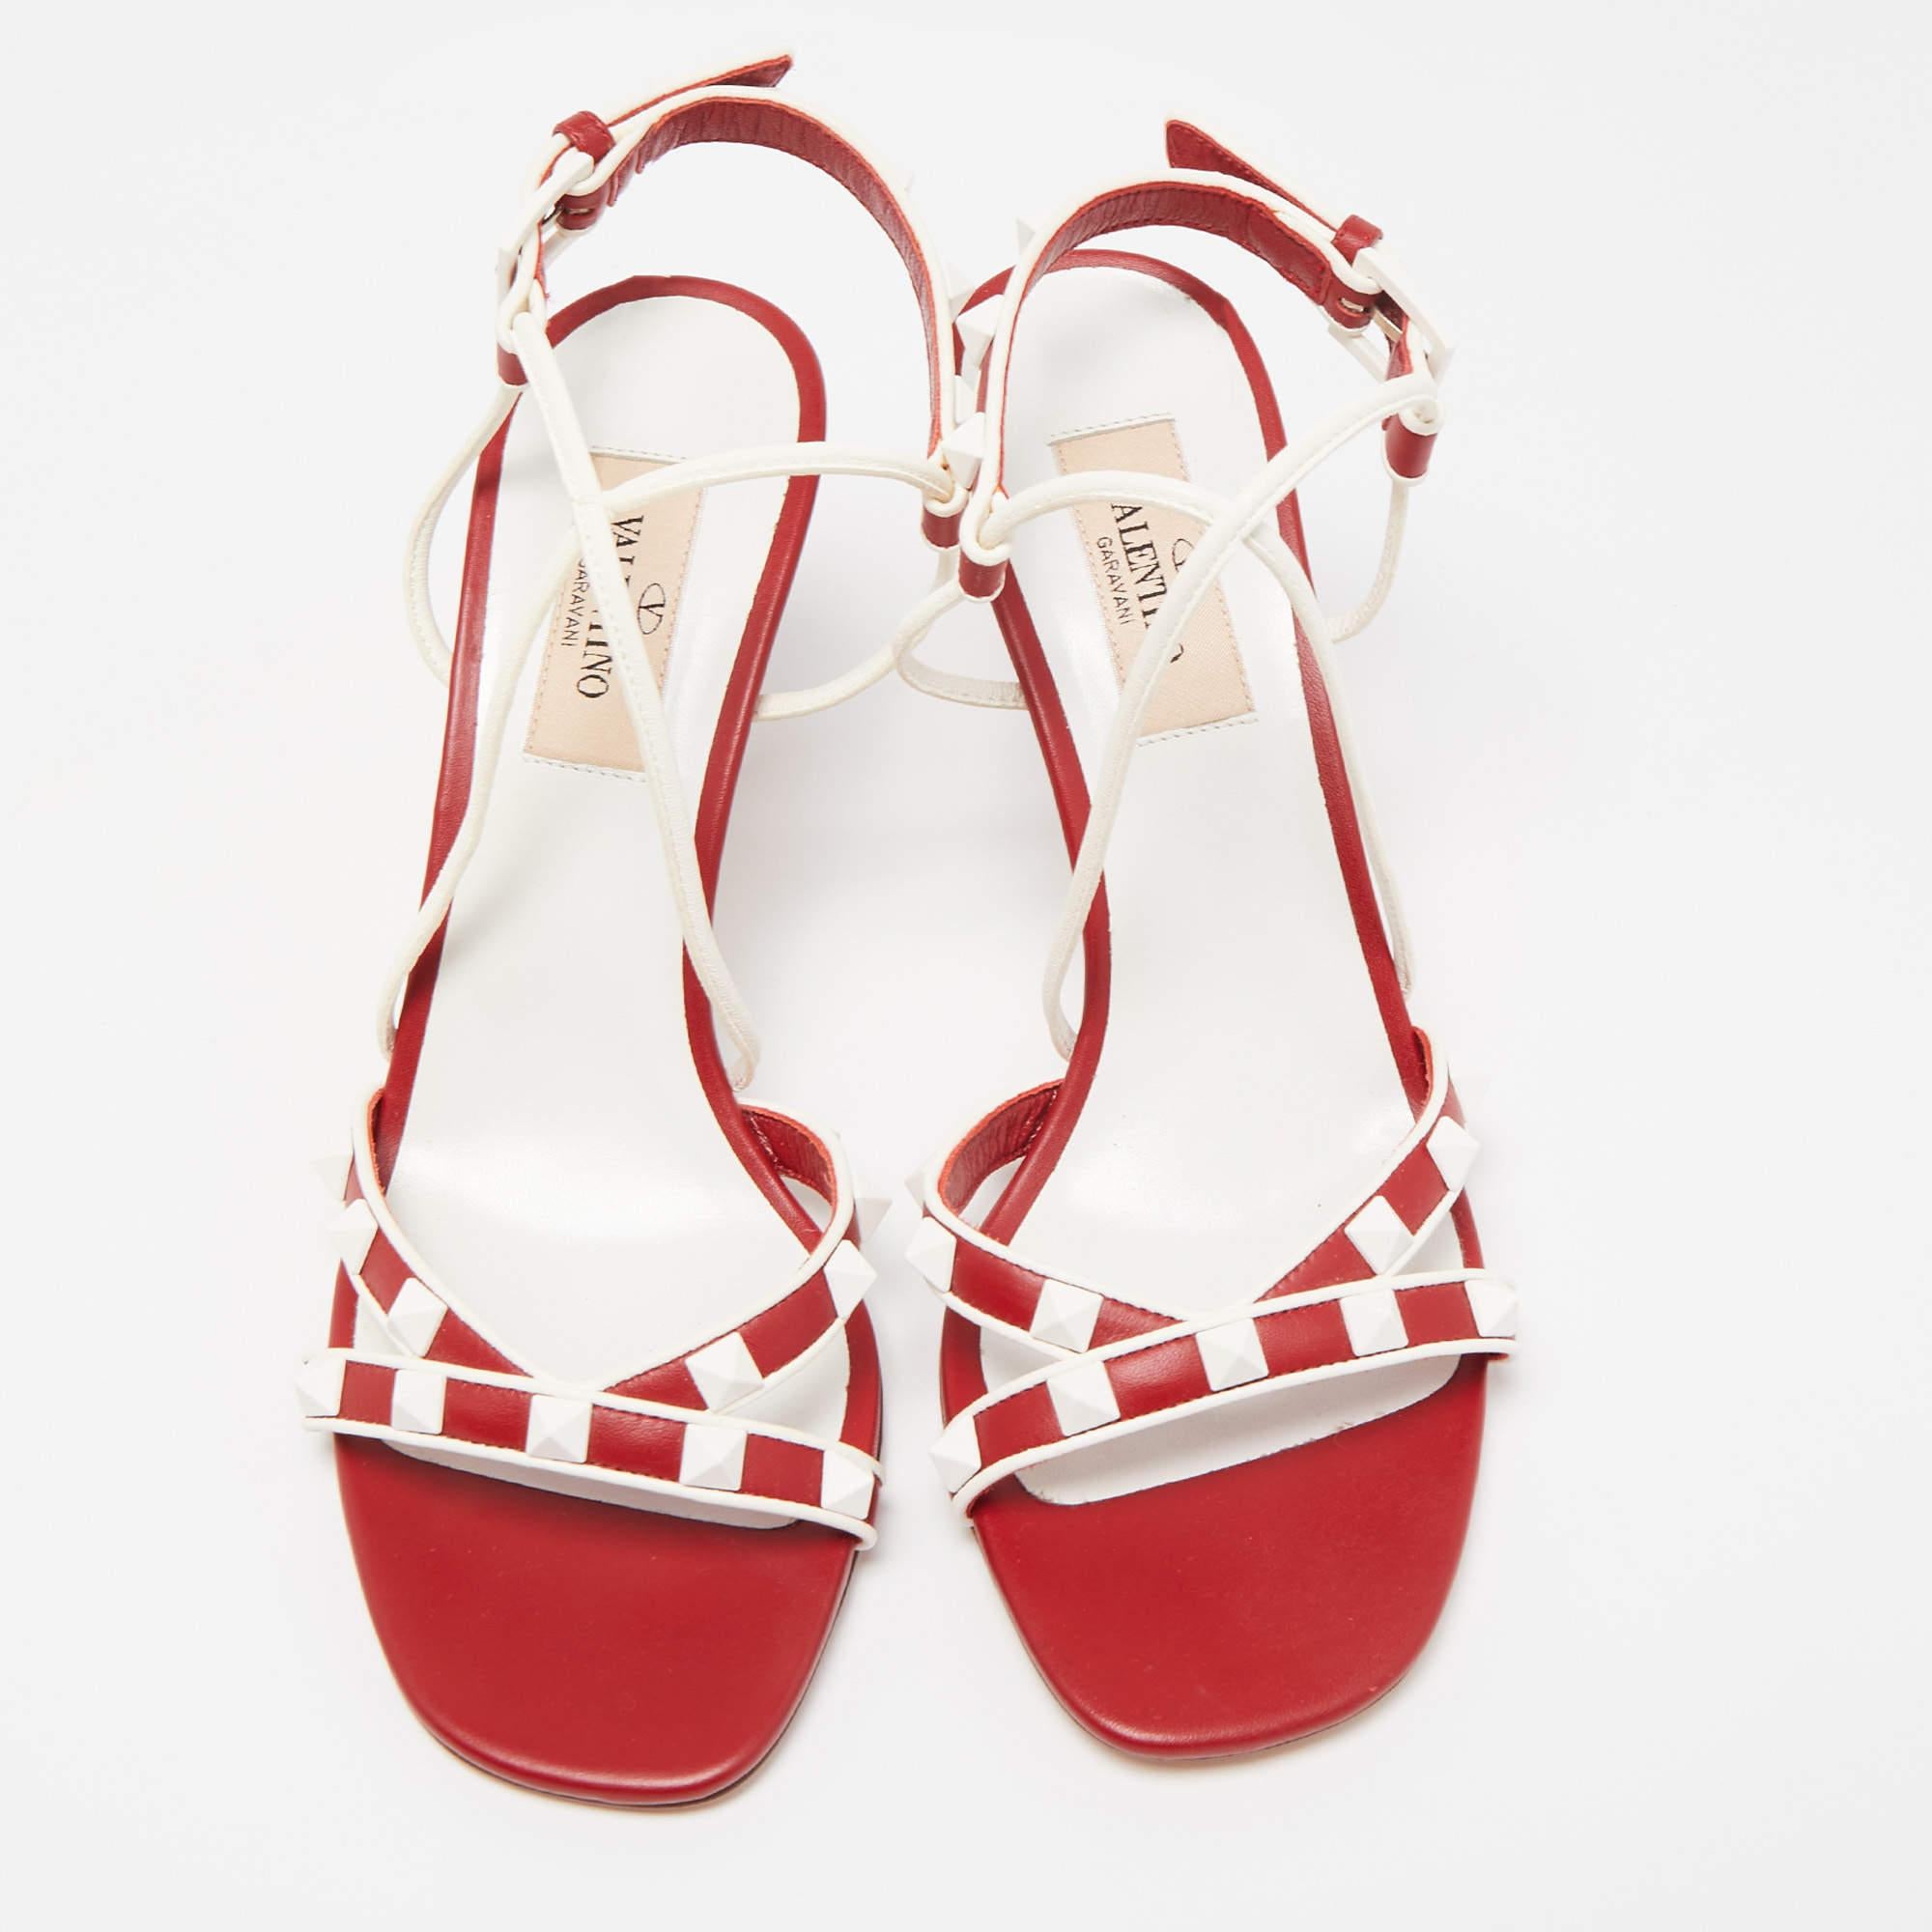 Valentino Red/White Leather Rockstud Ankle Strap Sandals Size 36.5 3